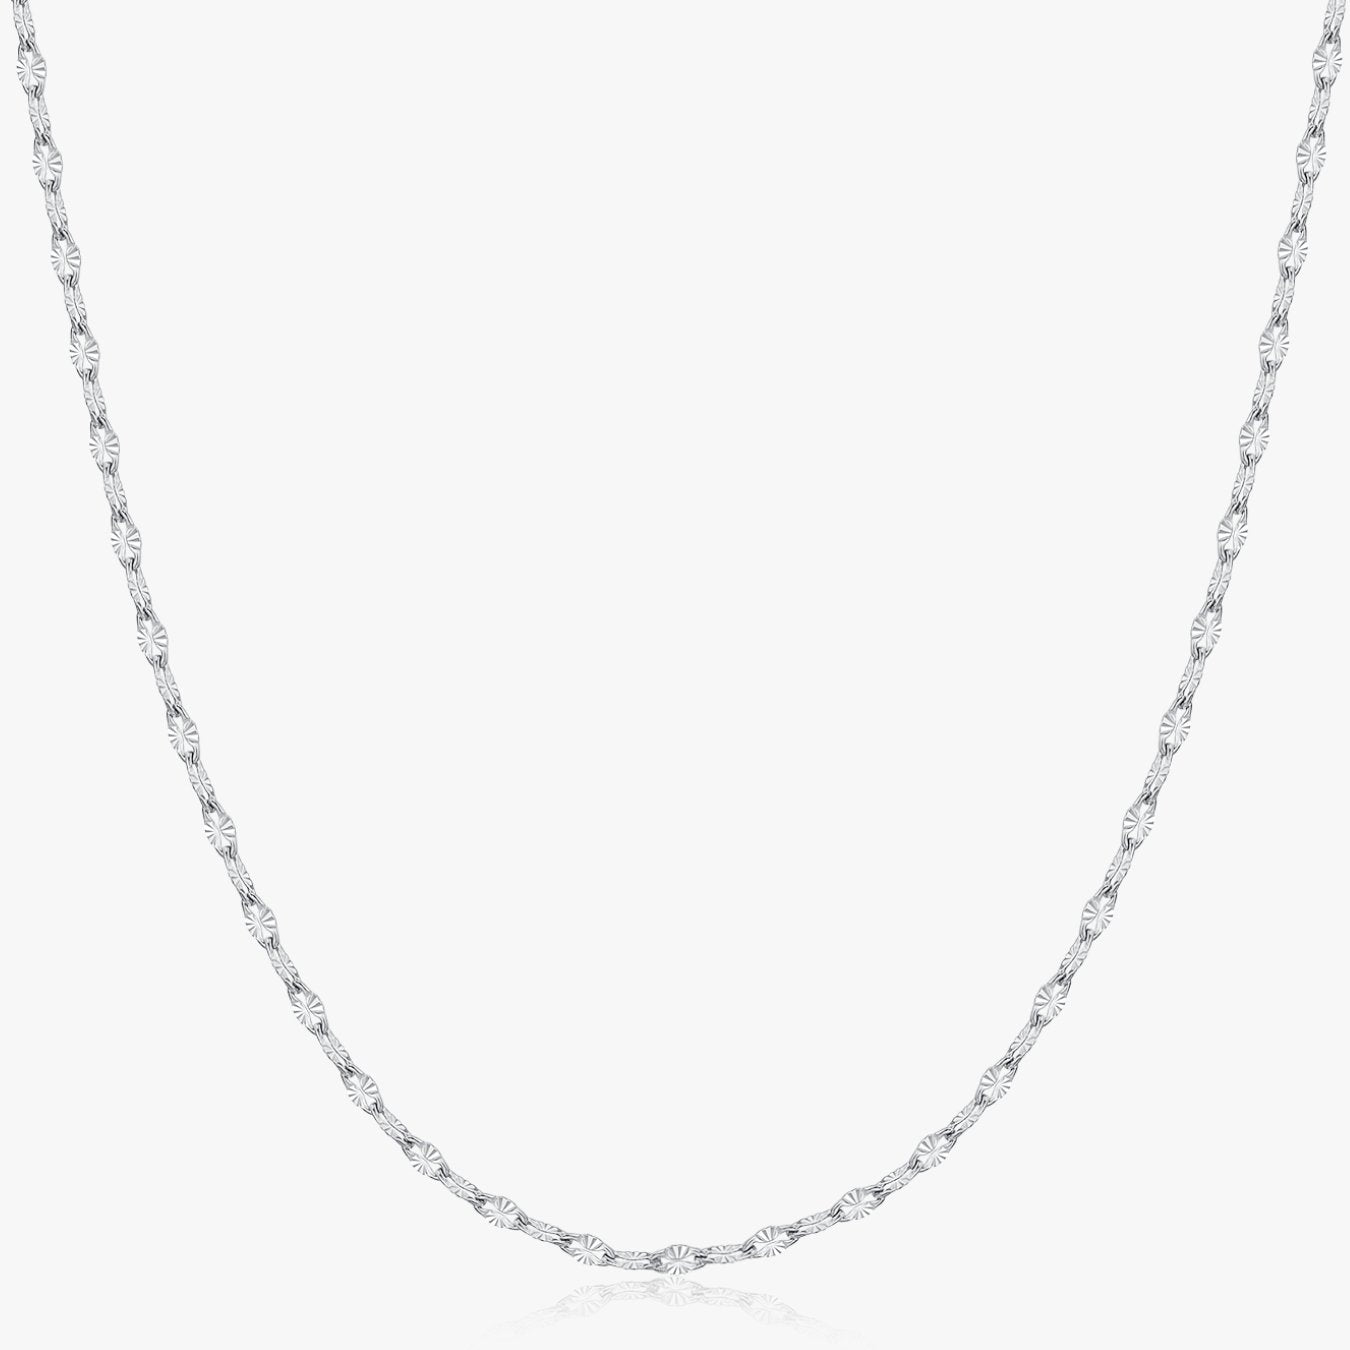 Silver Sequin Chain Necklace - Flaire & Co.